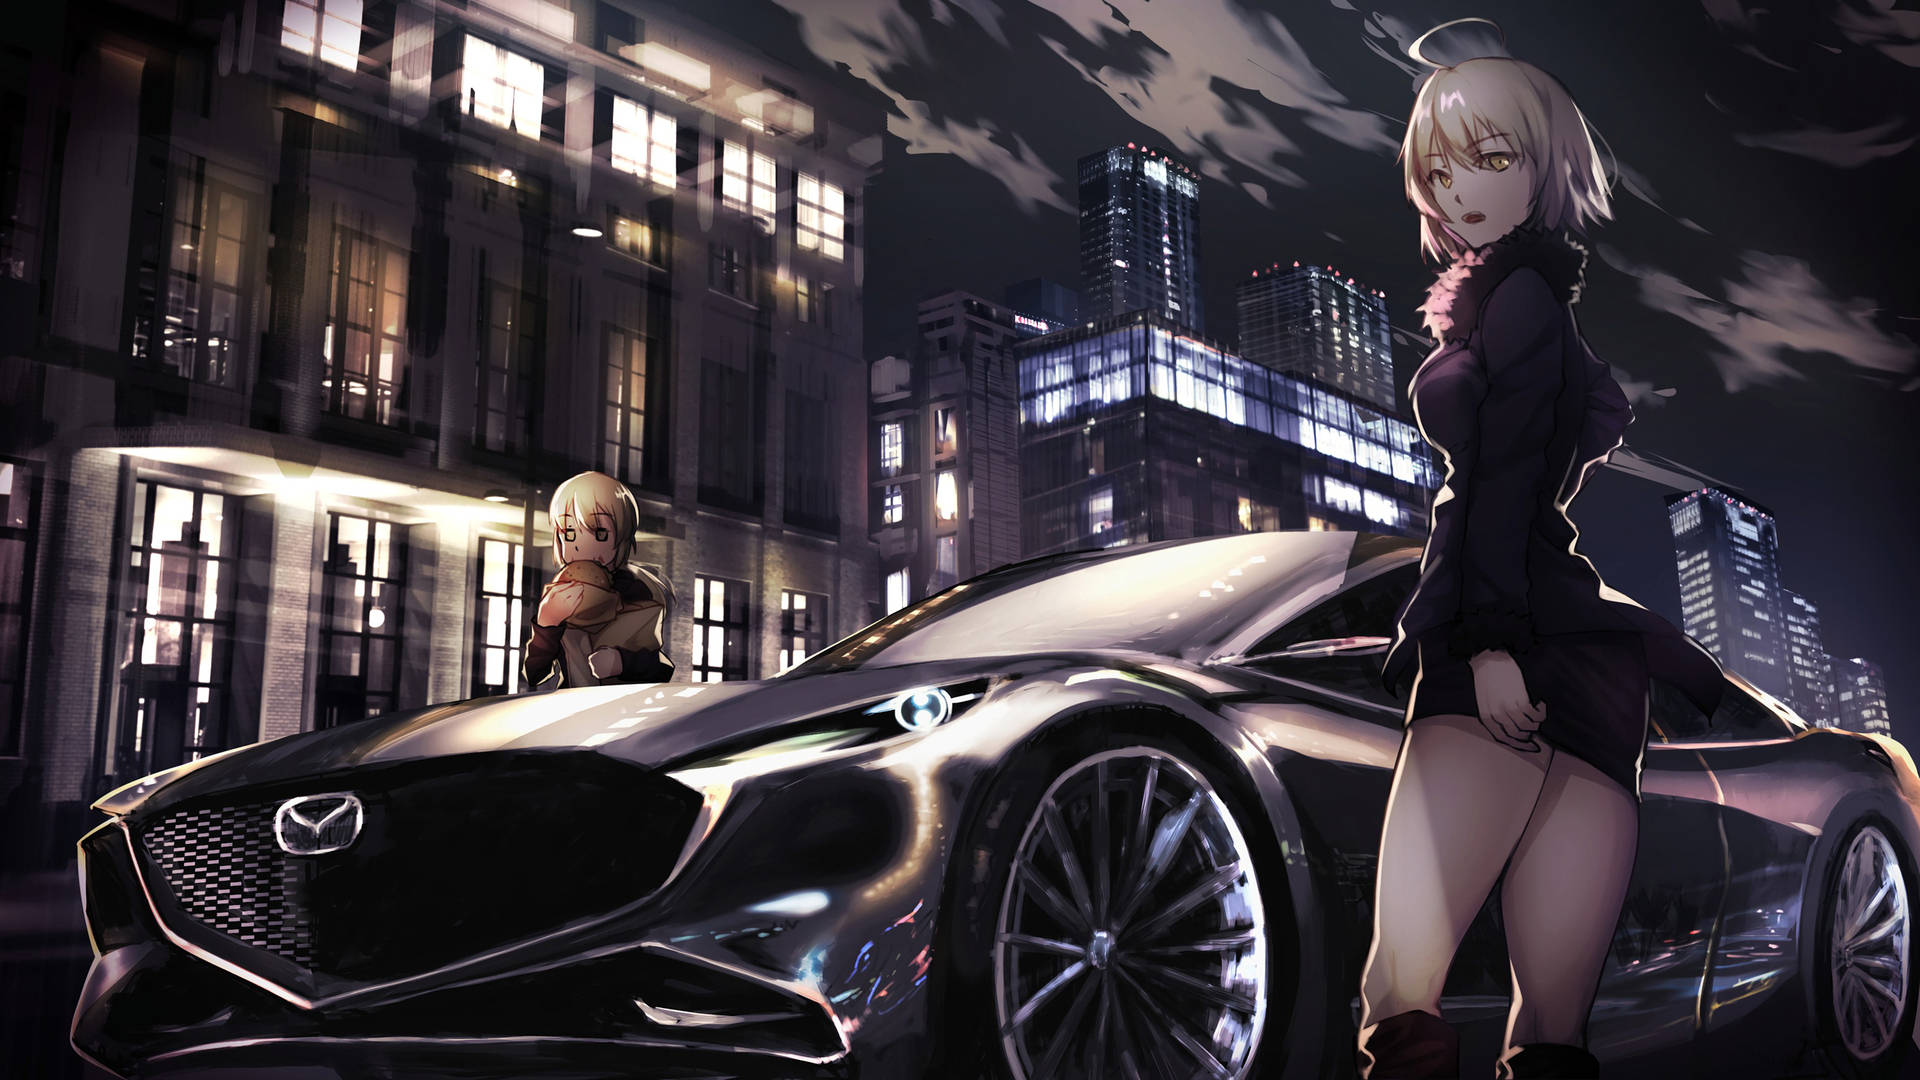 Two Girls And A Mazda Car Anime Wallpaper